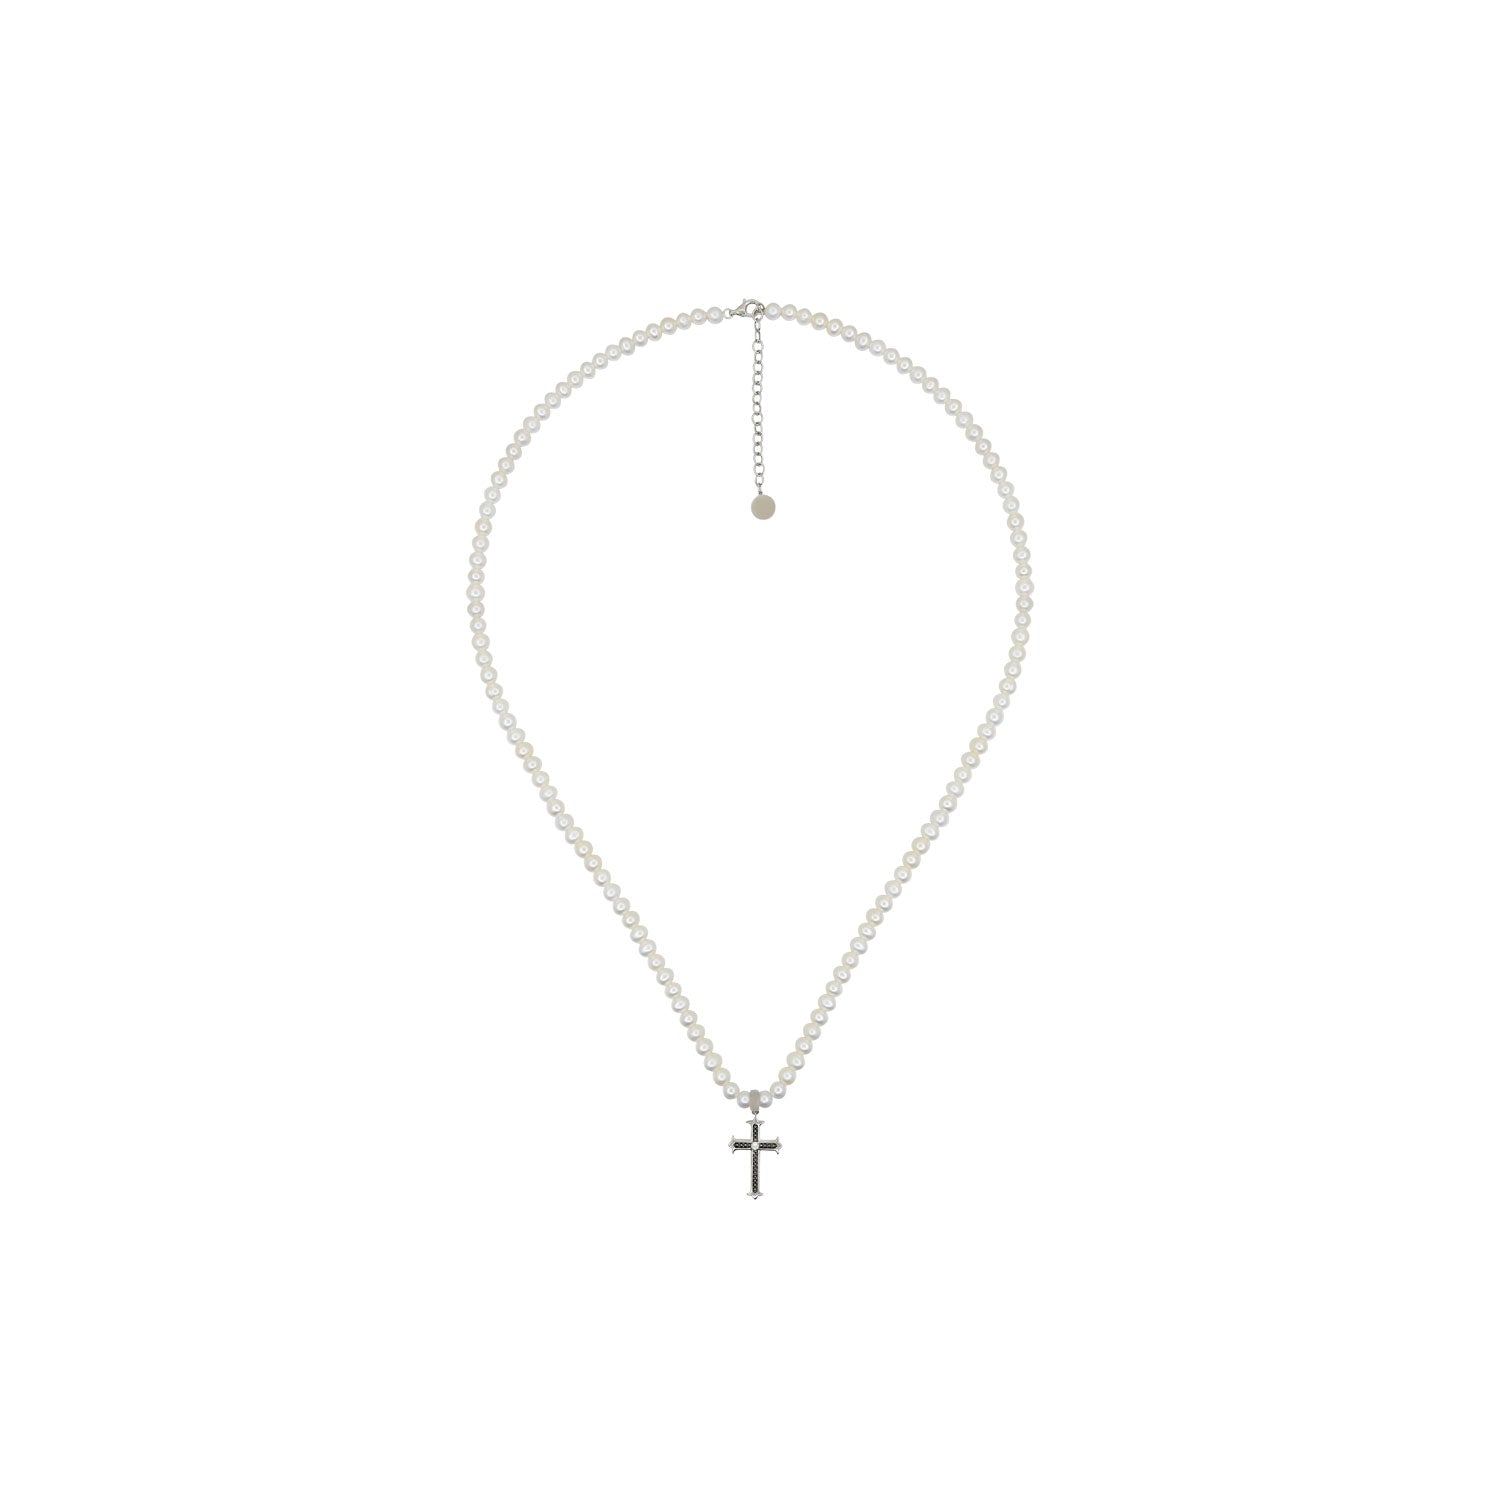 pearl_crosse_necklace_14k_white_gold_3